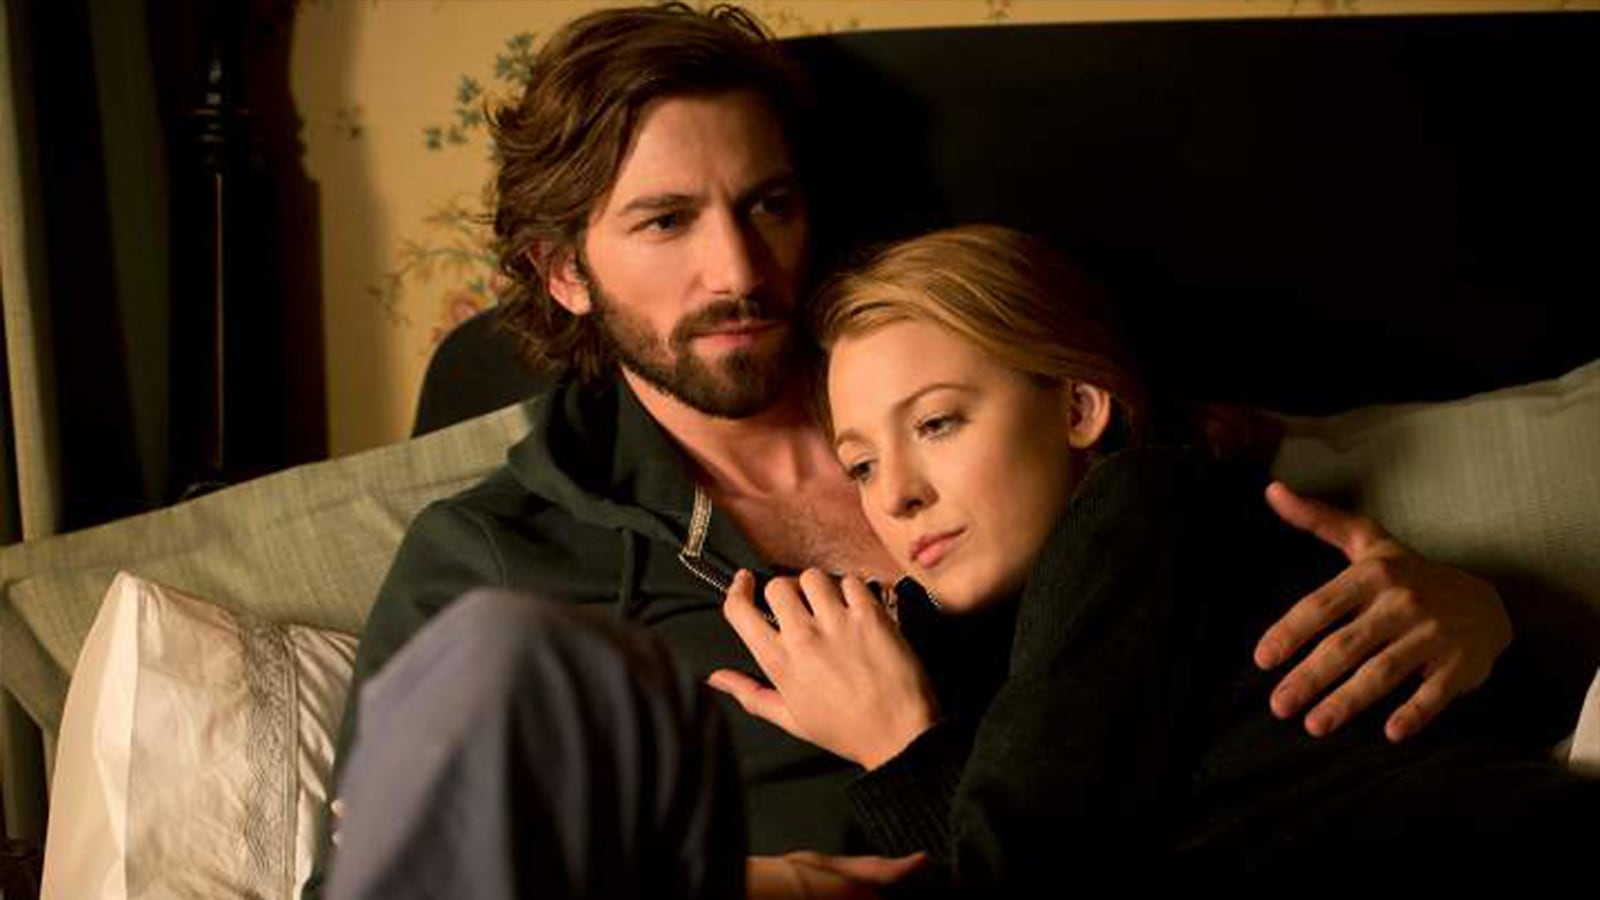 the-age-of-adaline-2015